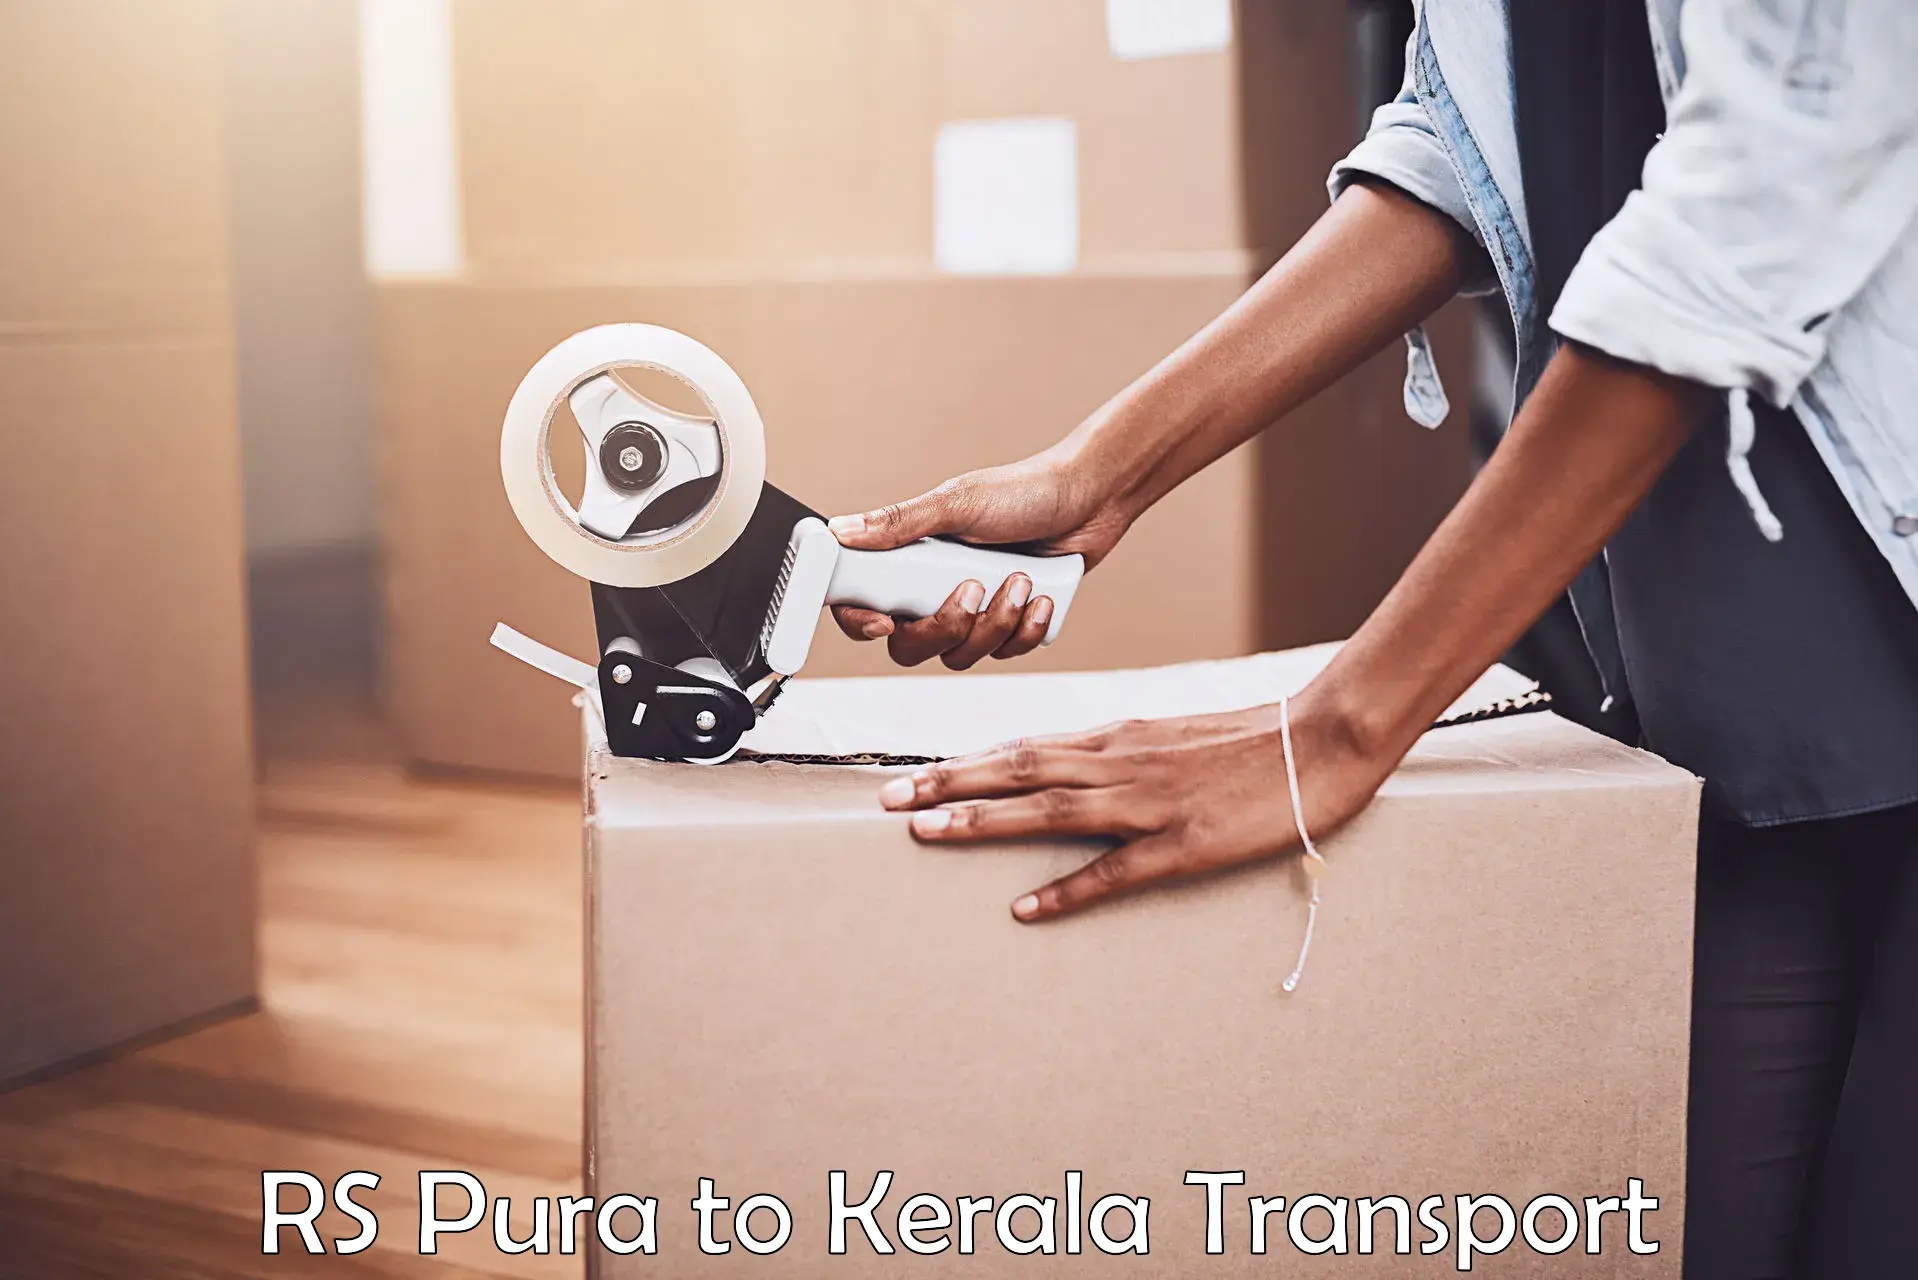 Express transport services RS Pura to Anjumoorthy